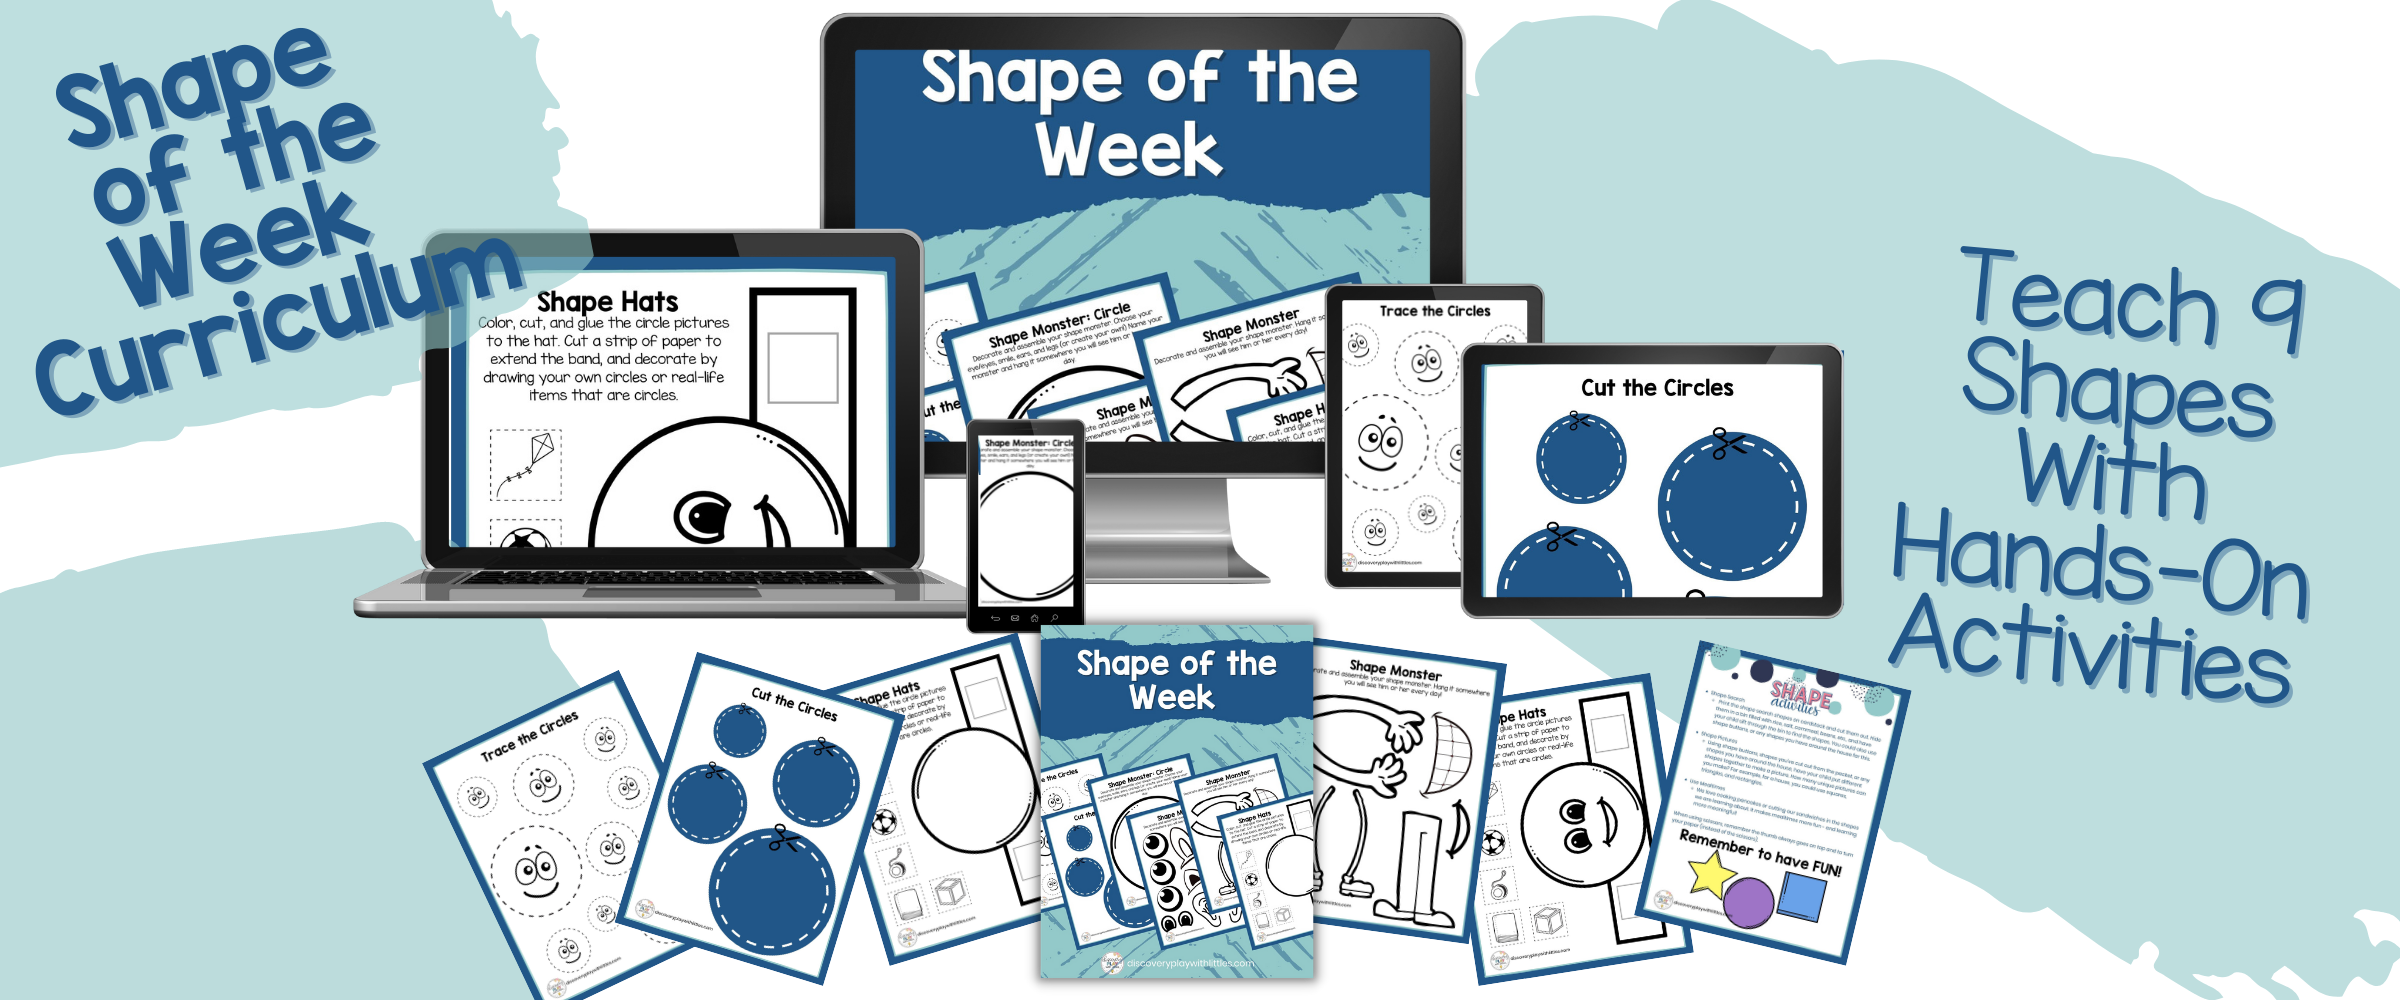 Image of Shape of the Week Curriculum